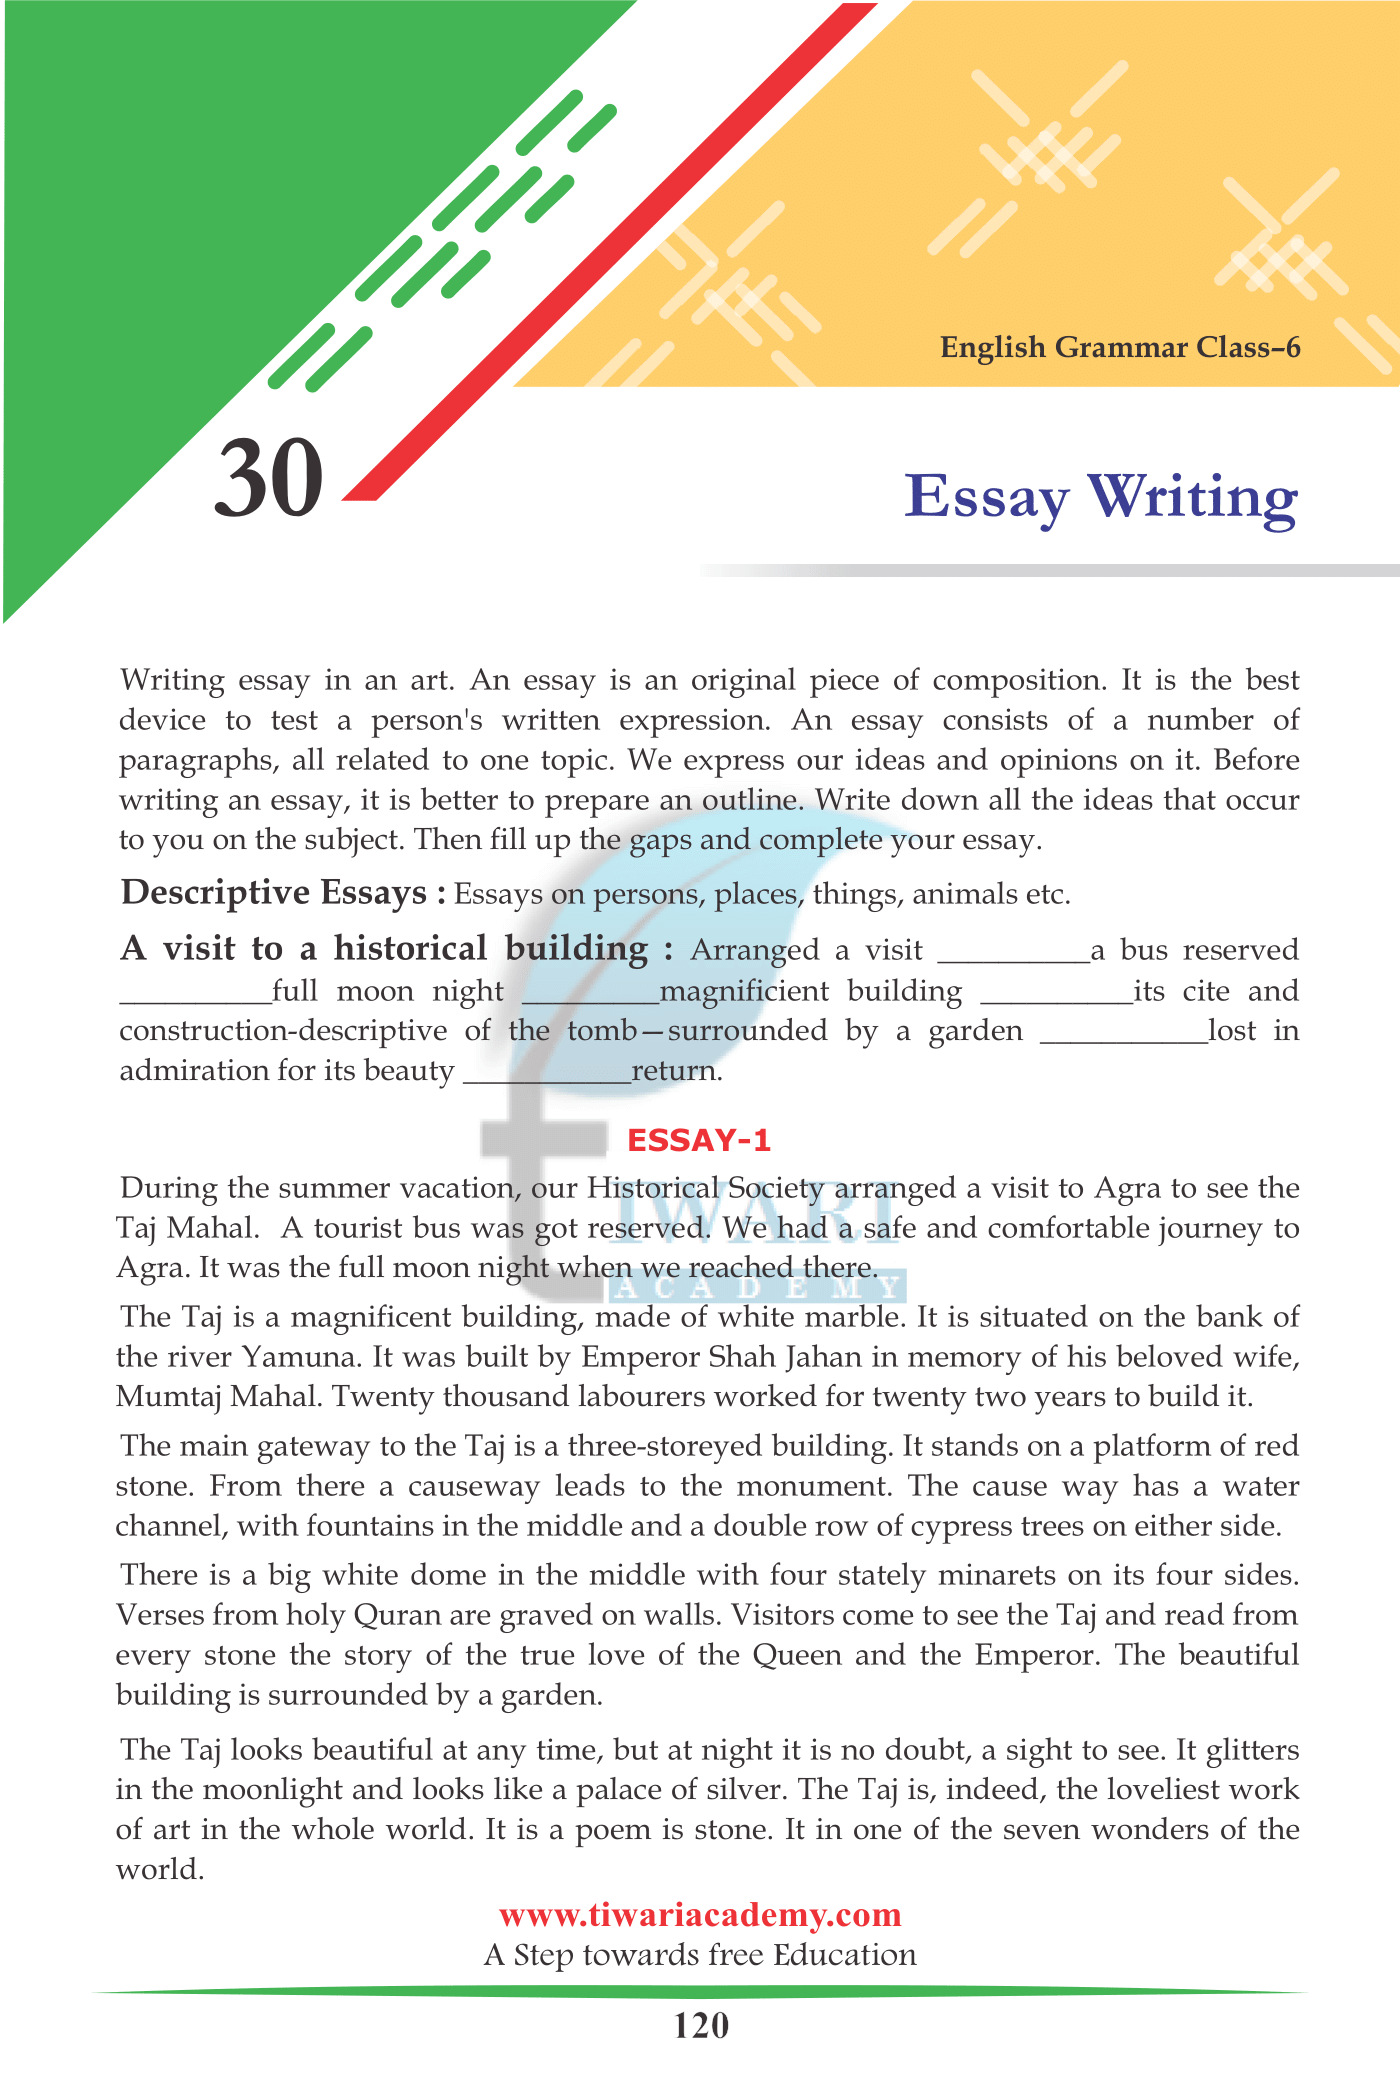 essay writing topics for class 6